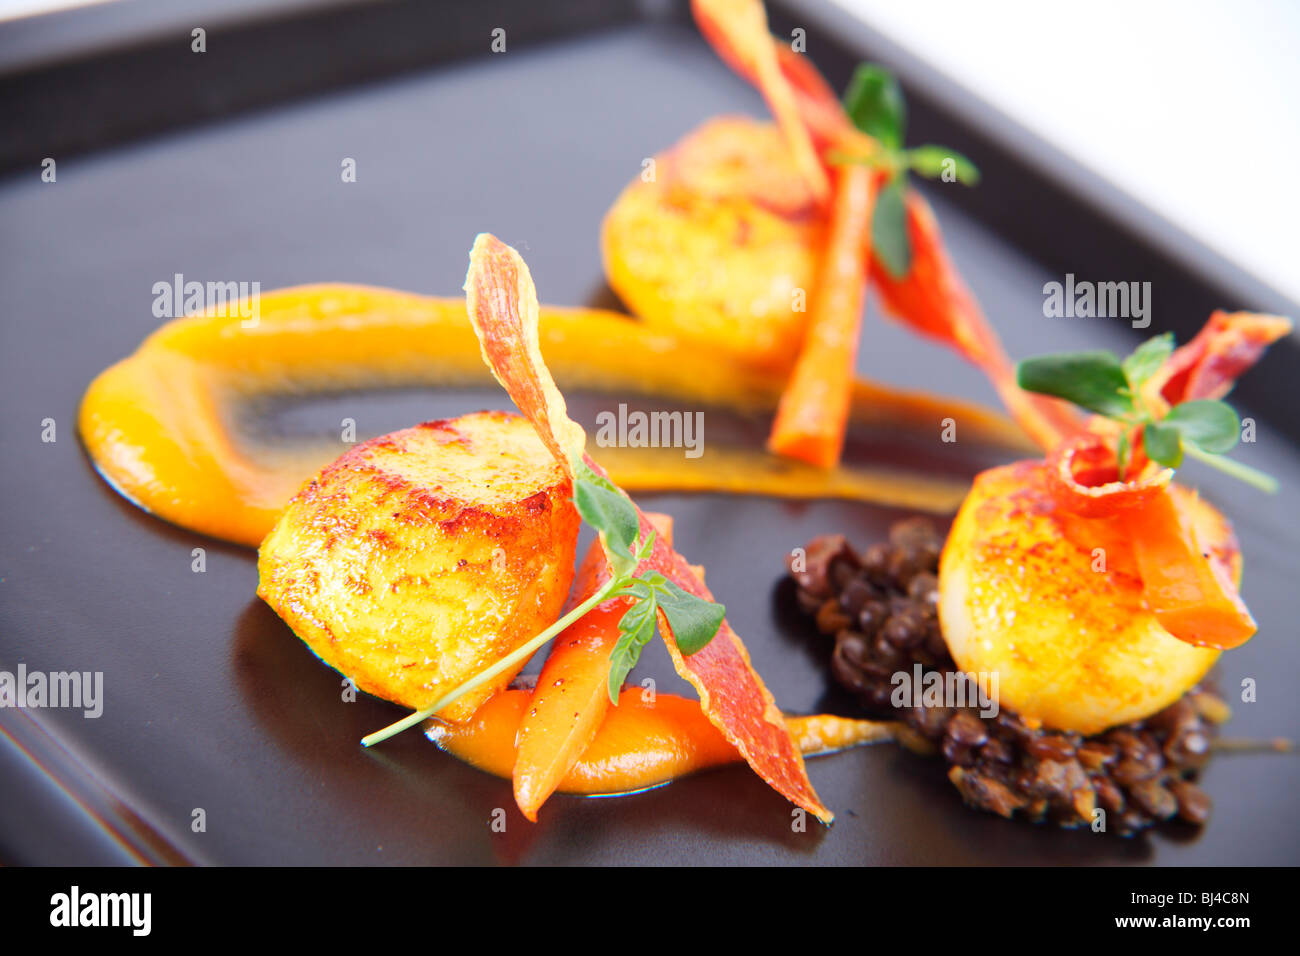 Trio of Scallops on Curried Lentils, Butternut Squash Puree and Crispy Parma Ham Stock Photo